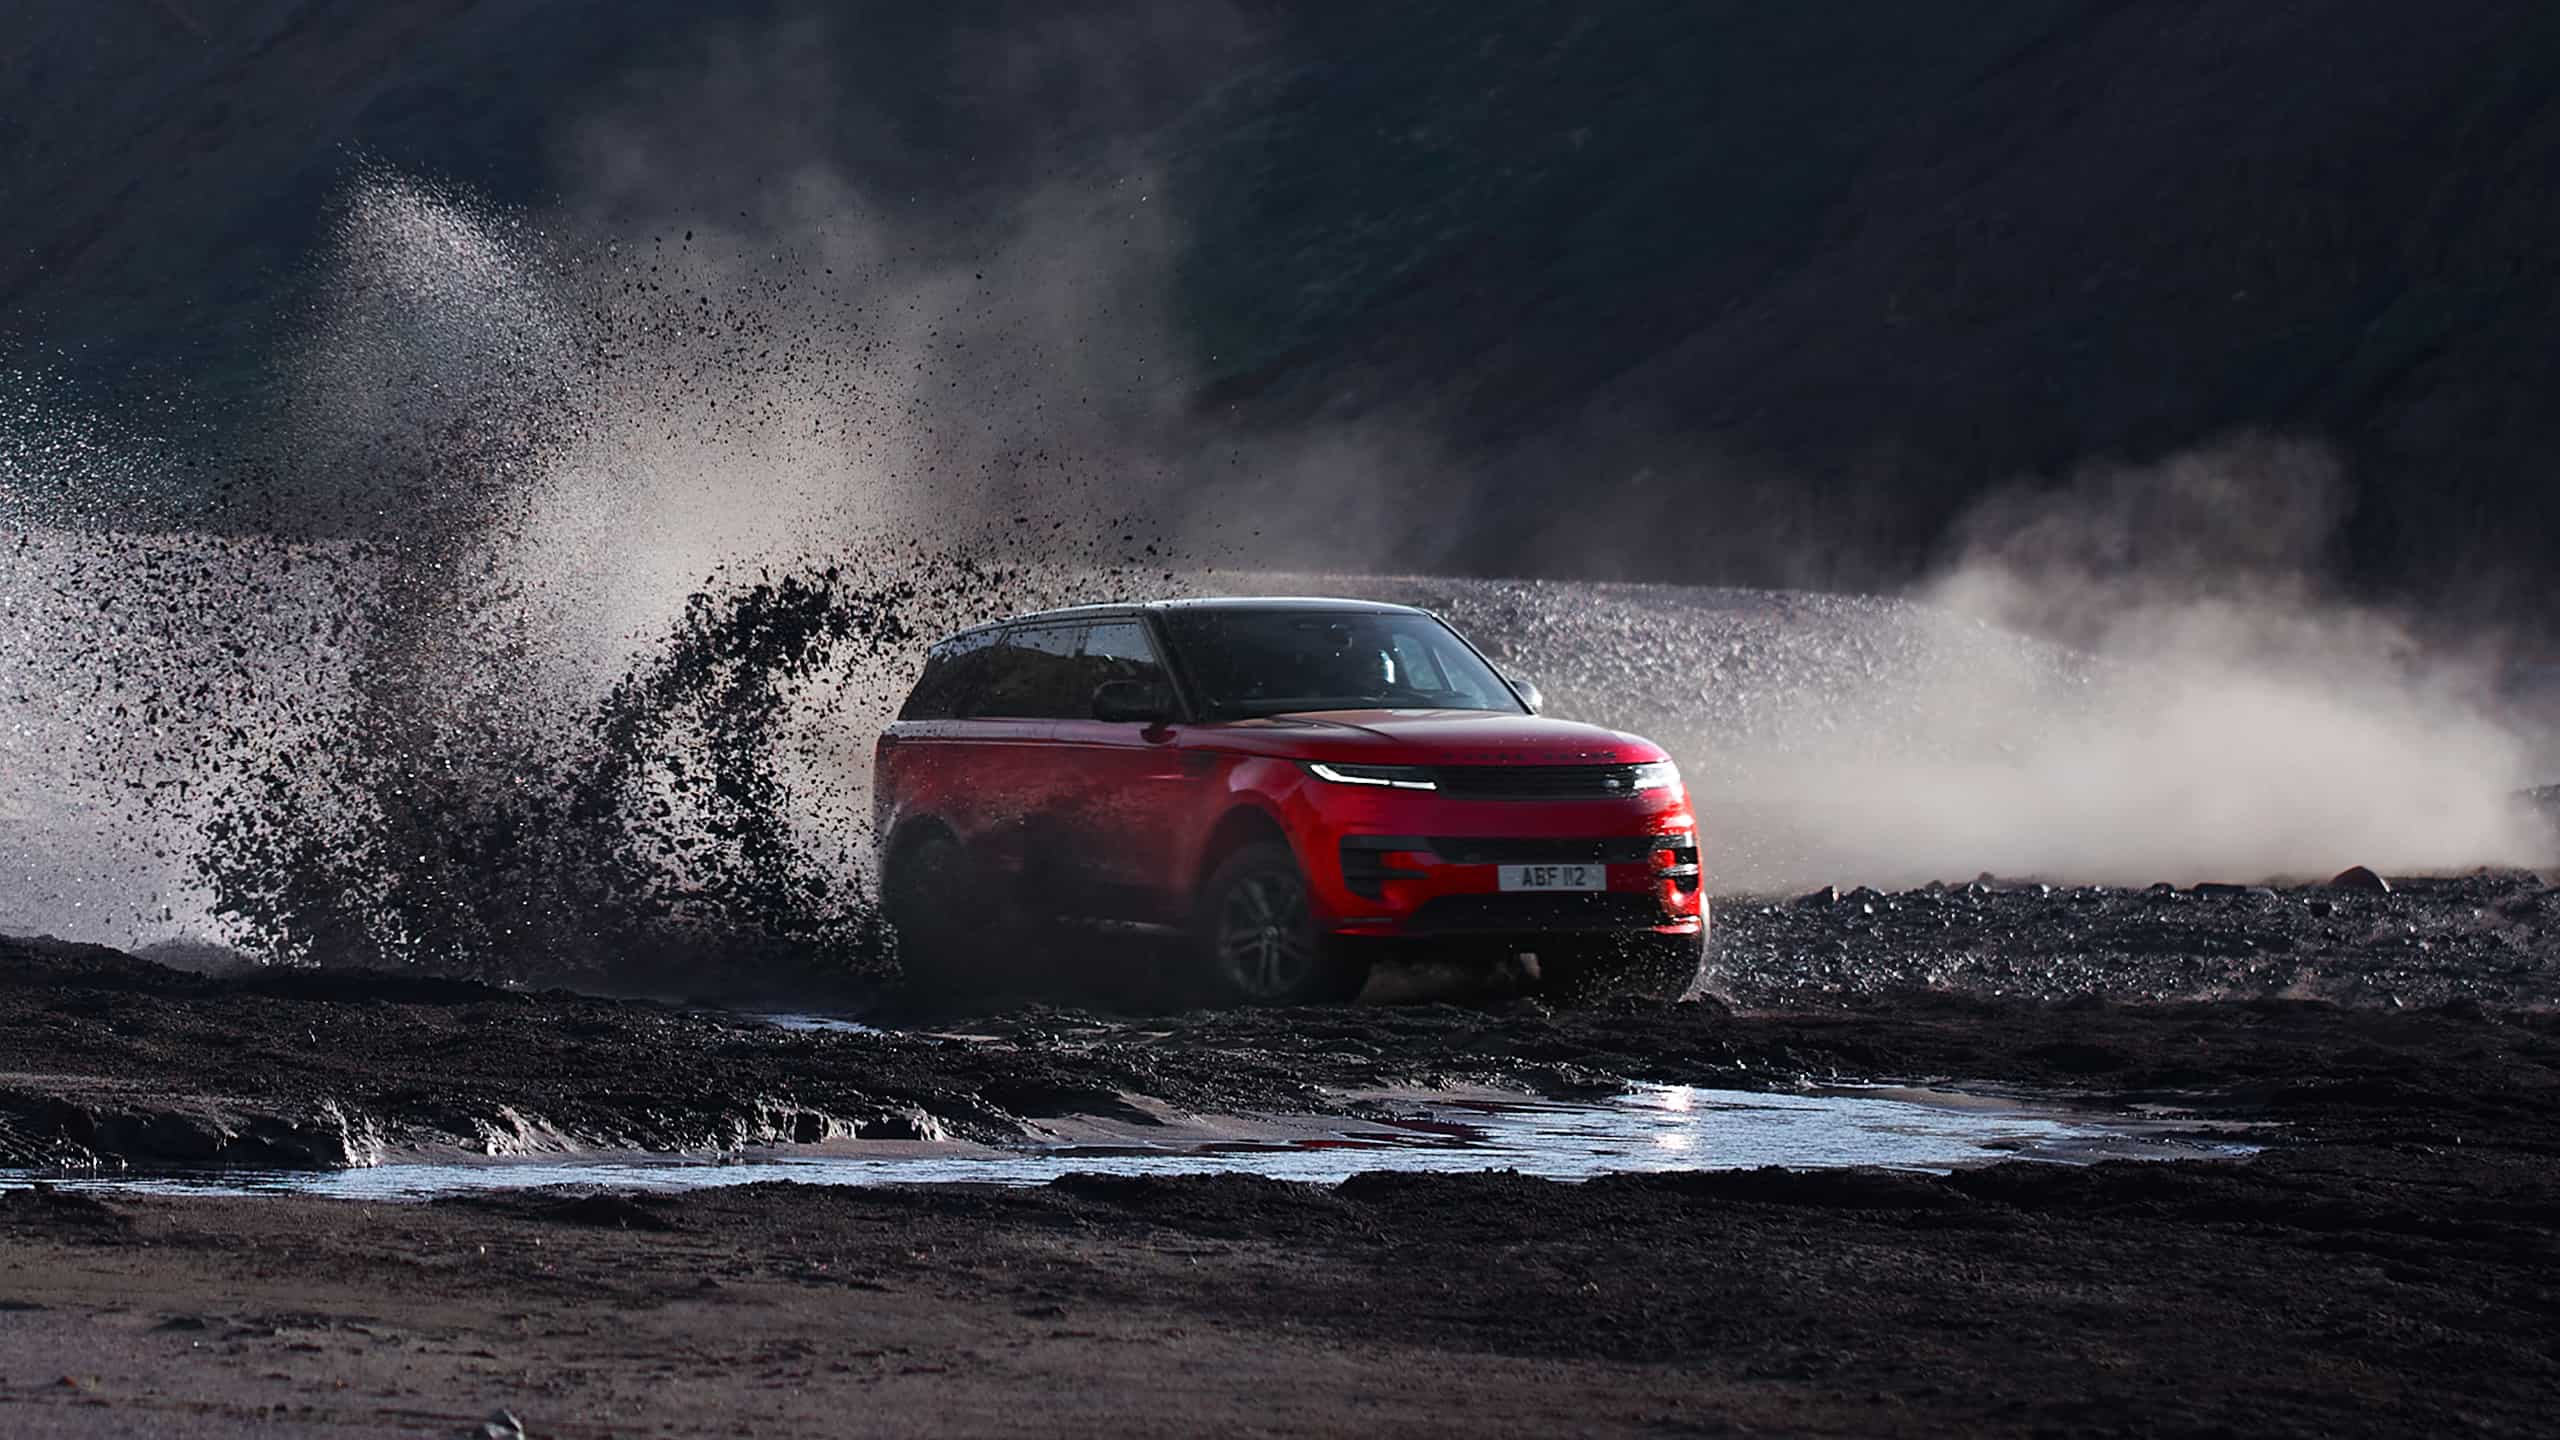 Range Rover Sport drifting over muddy off road